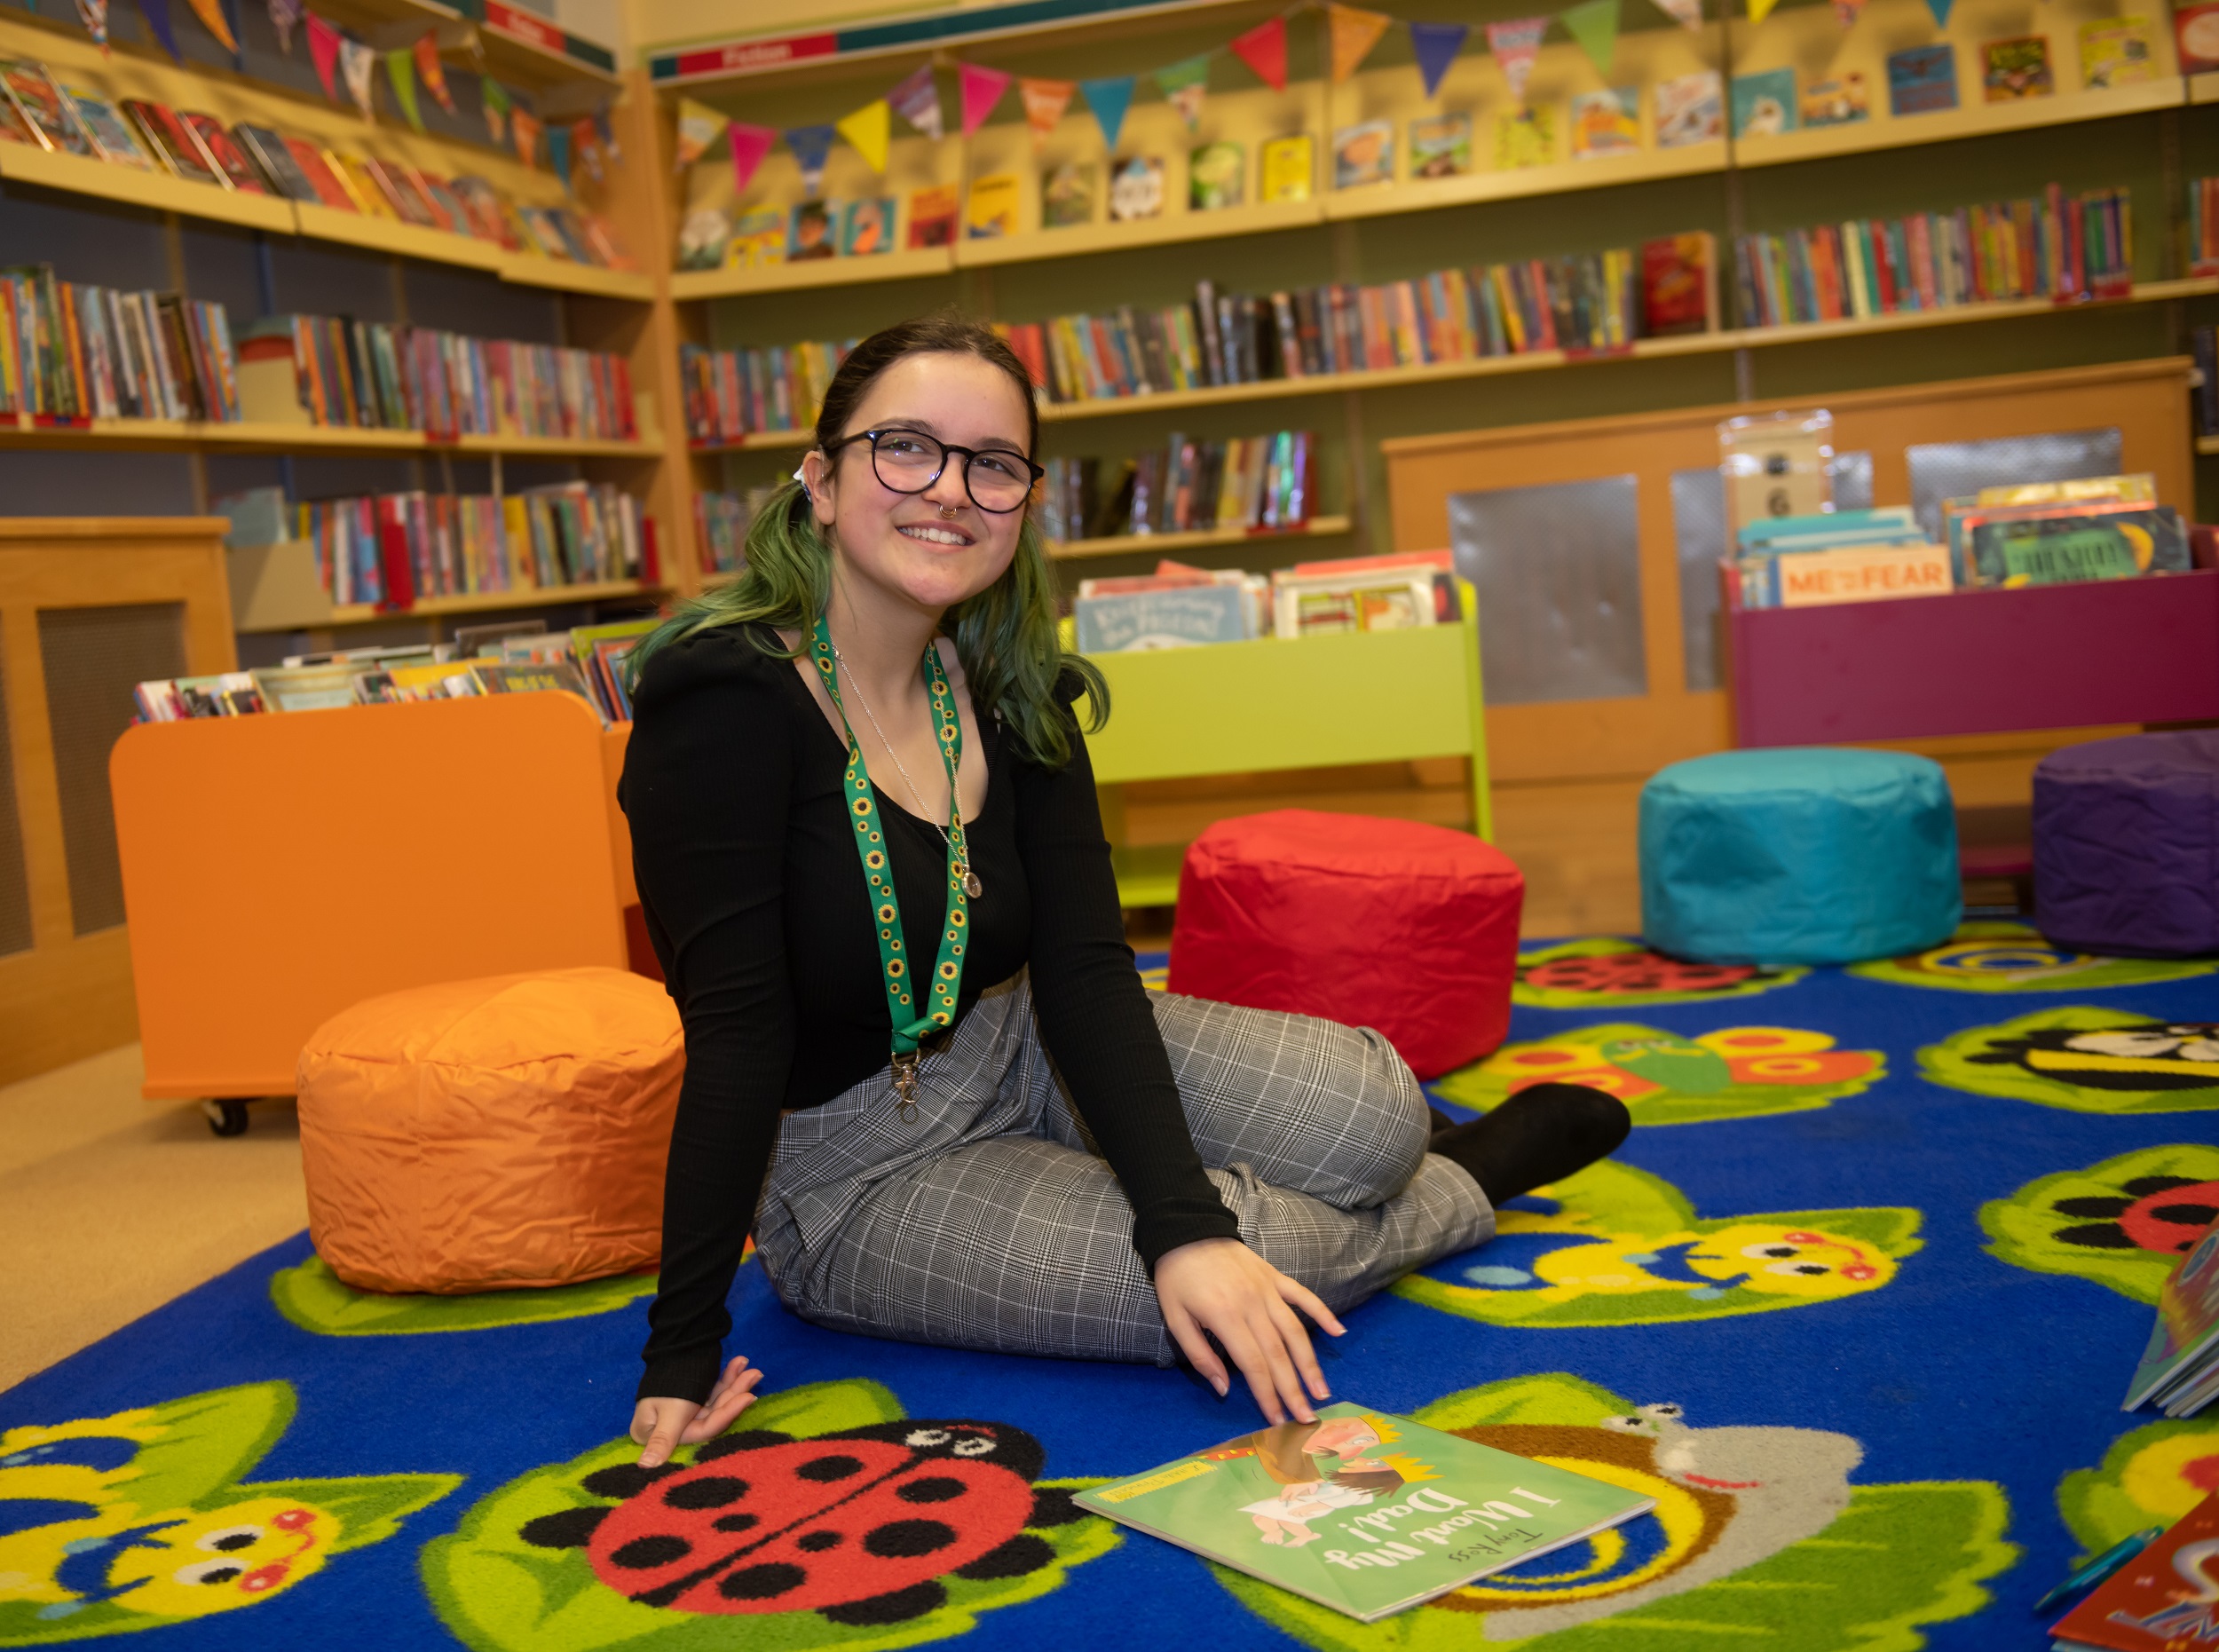 A library volunteer sat in a library